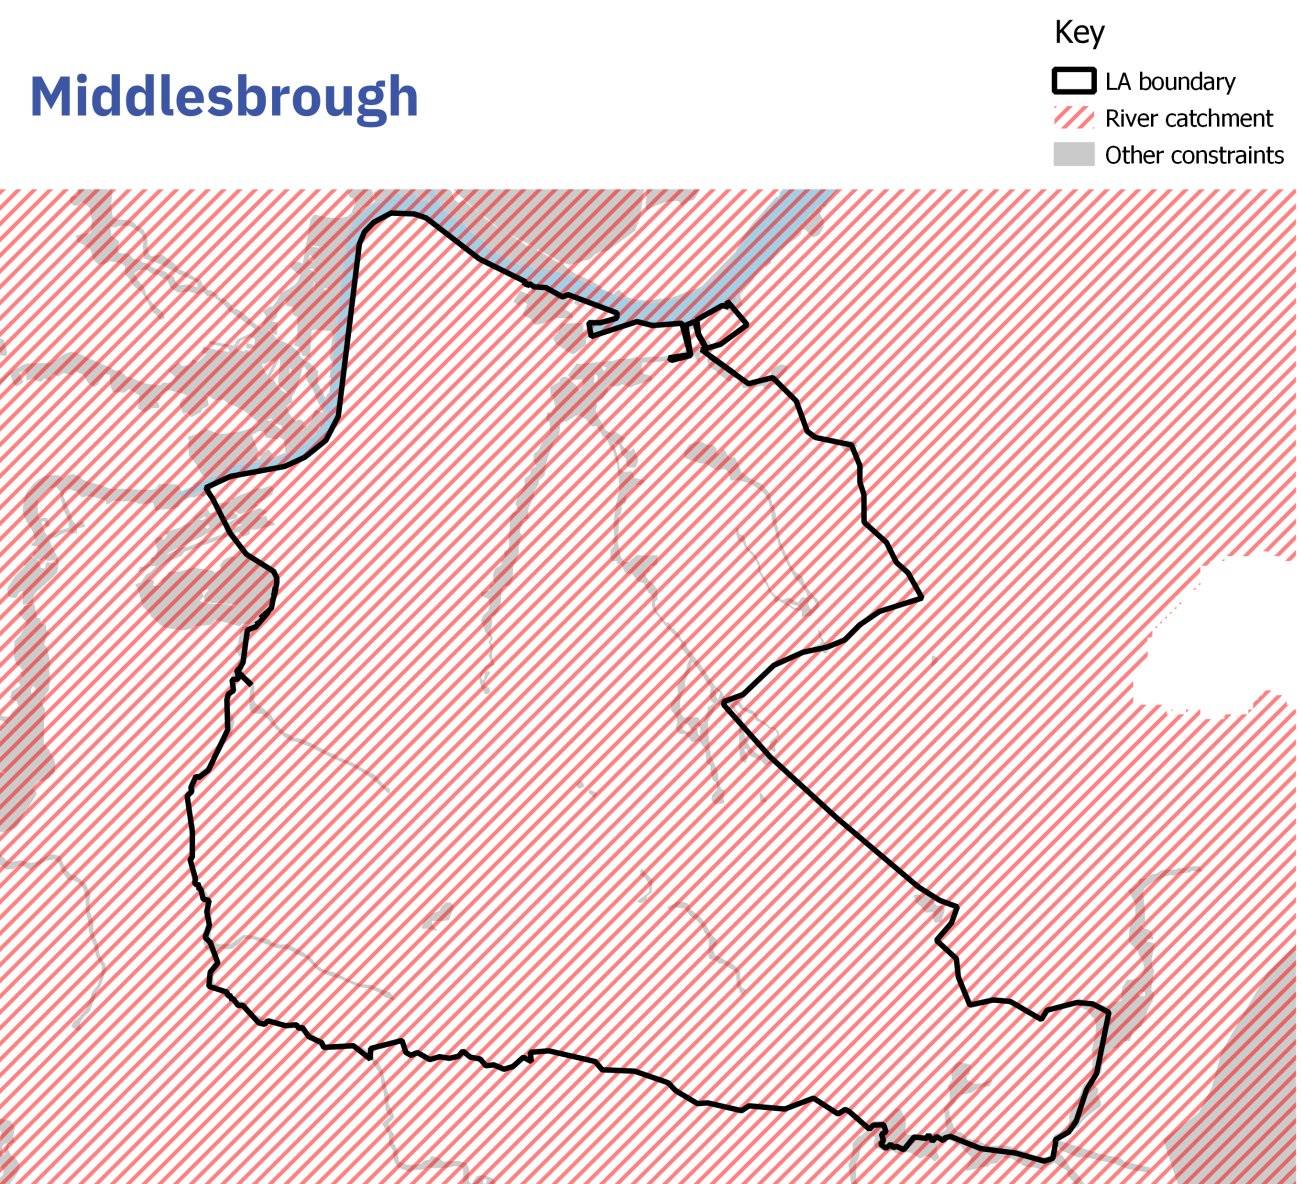 Land cover map: Middlesbrough